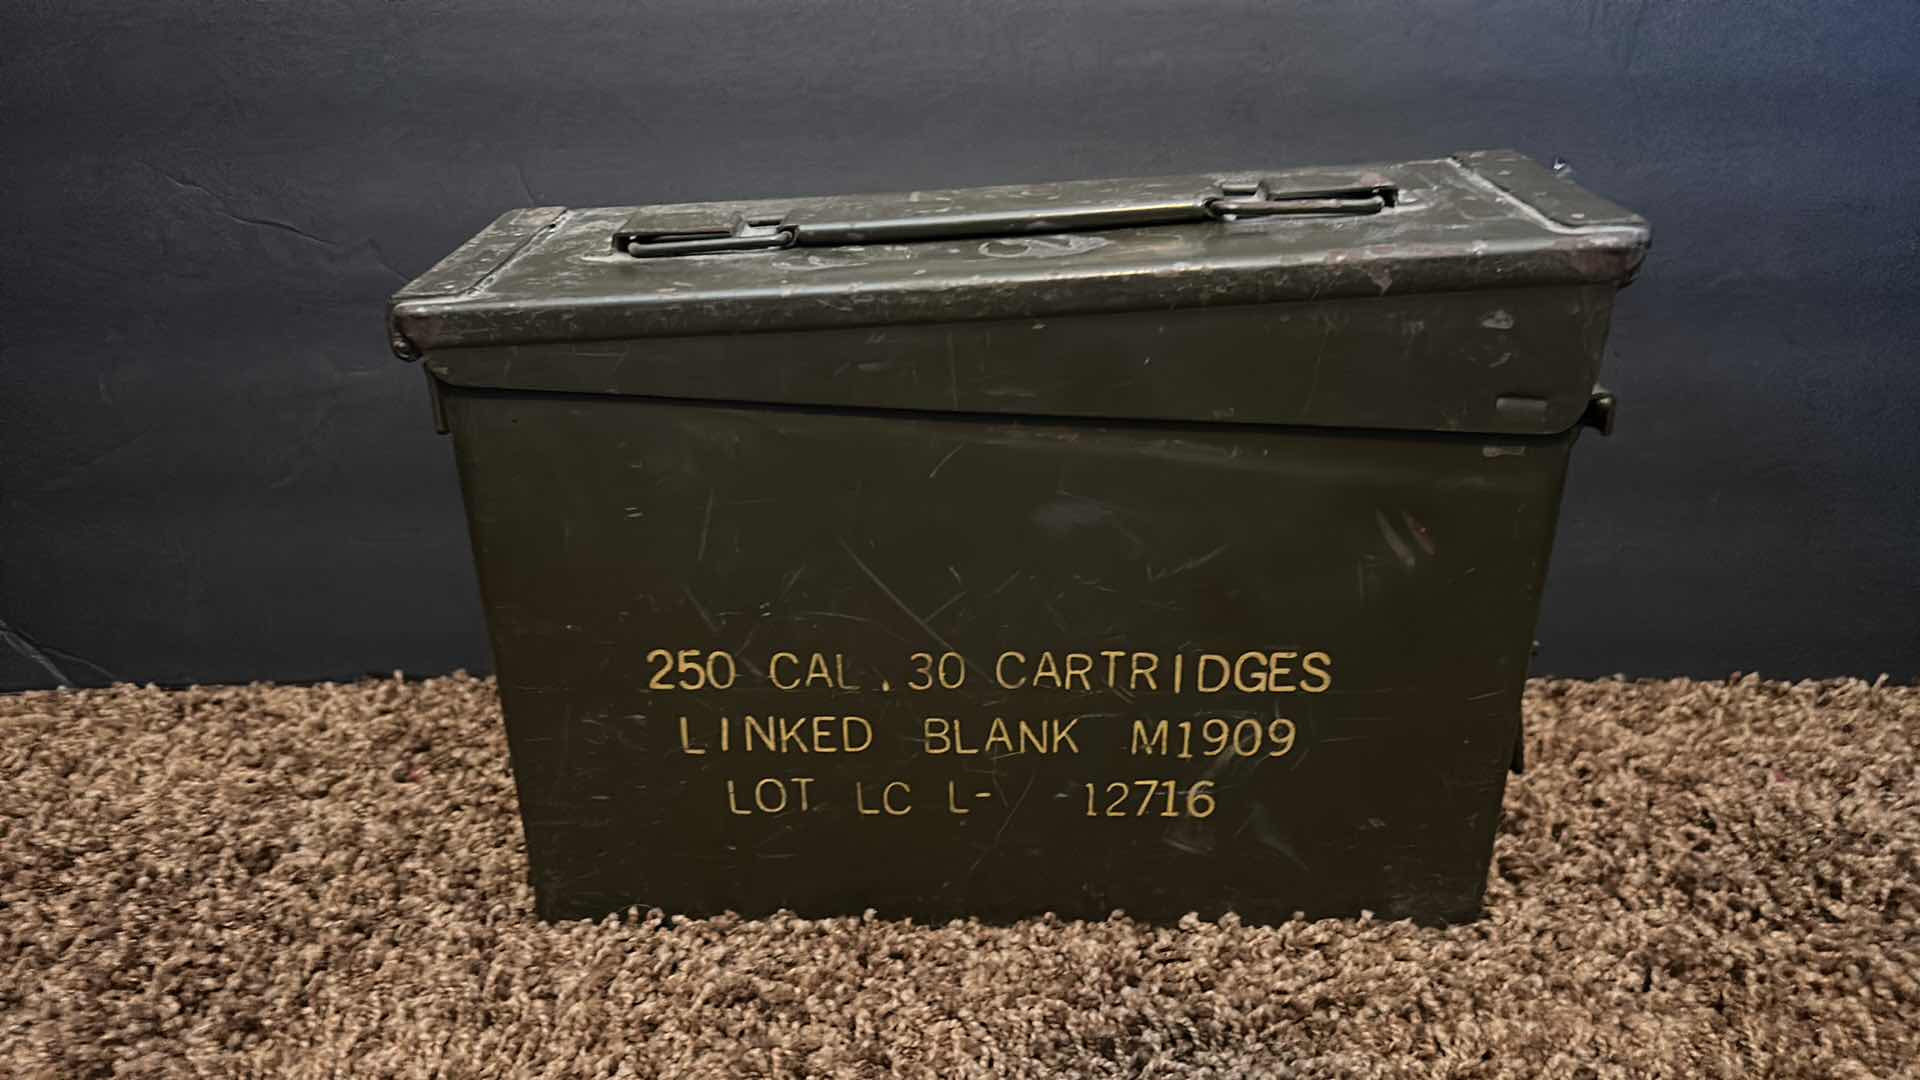 Photo 5 of GUN CLEANING KIT IN MILITARY GREEN METAL AMMUNITION CASE